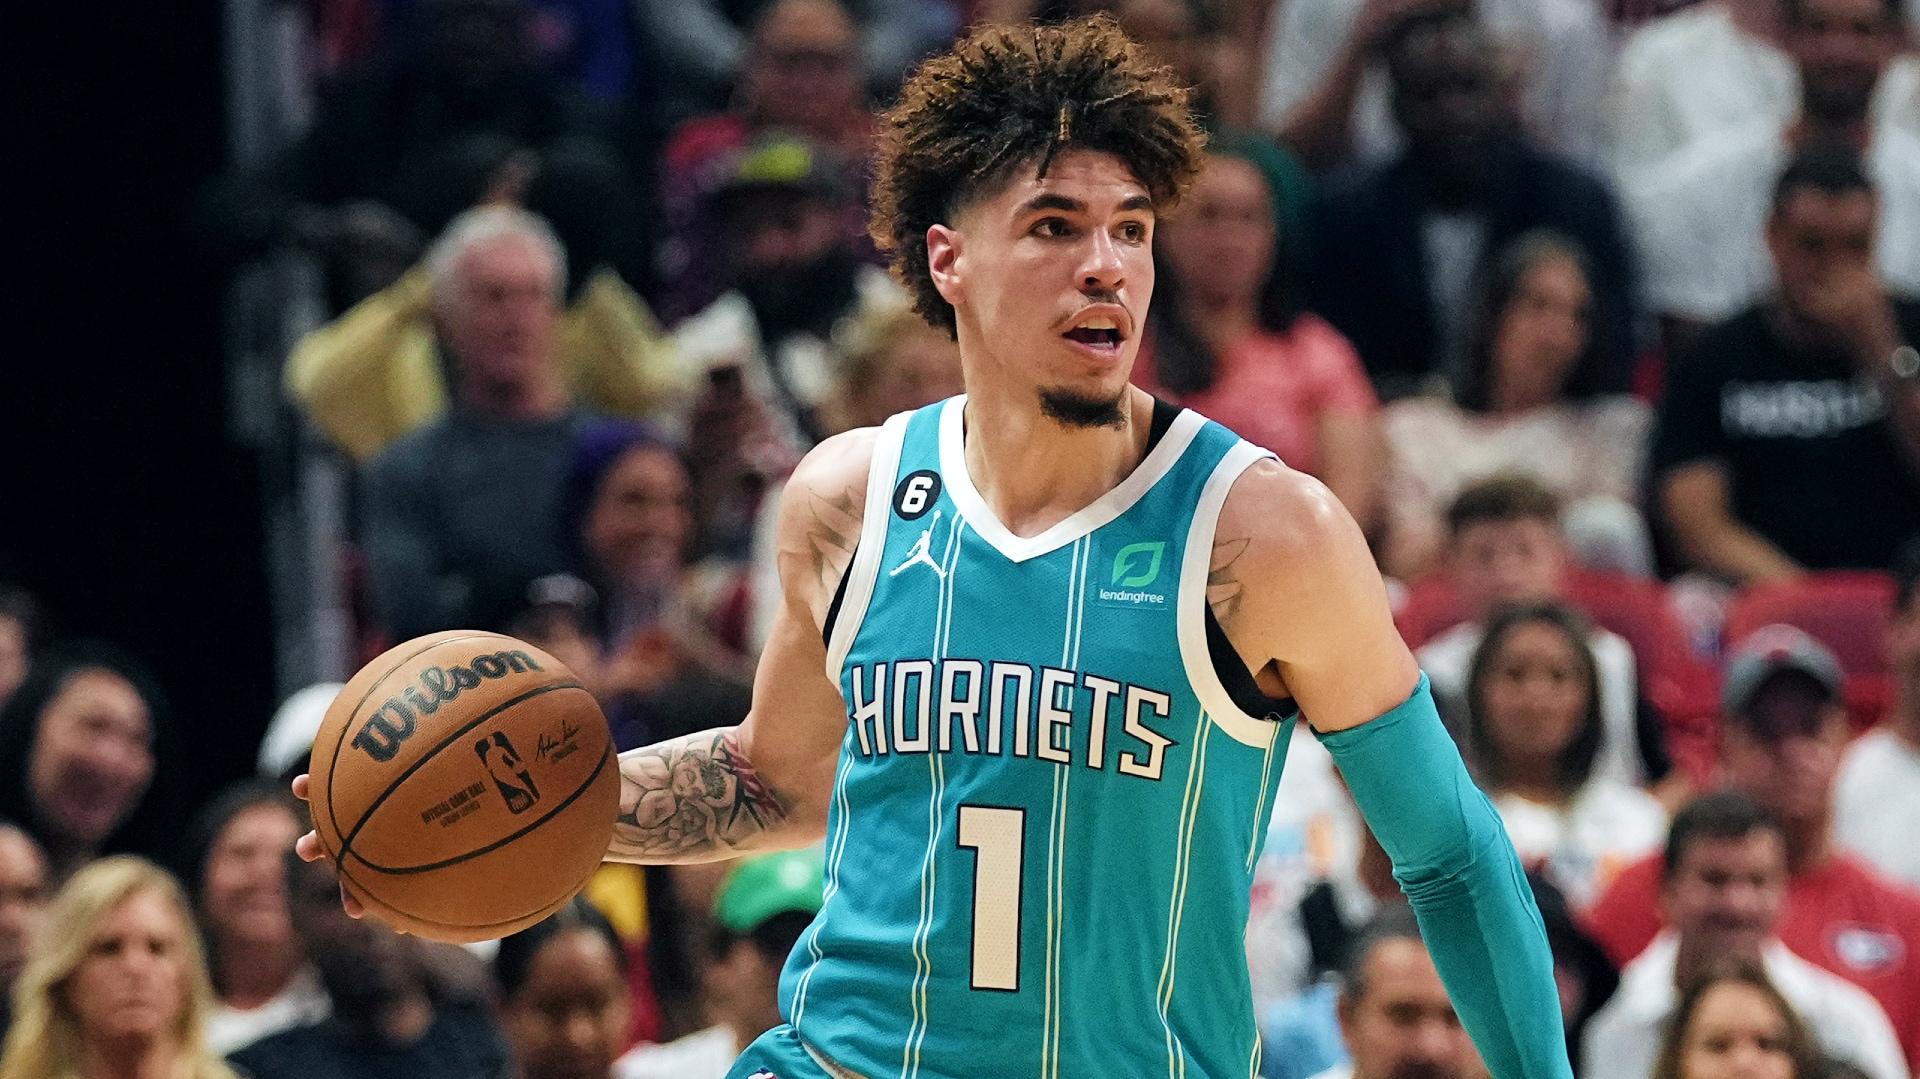 Lamelo Ball Makes Season Debut After Missing Games With Ankle